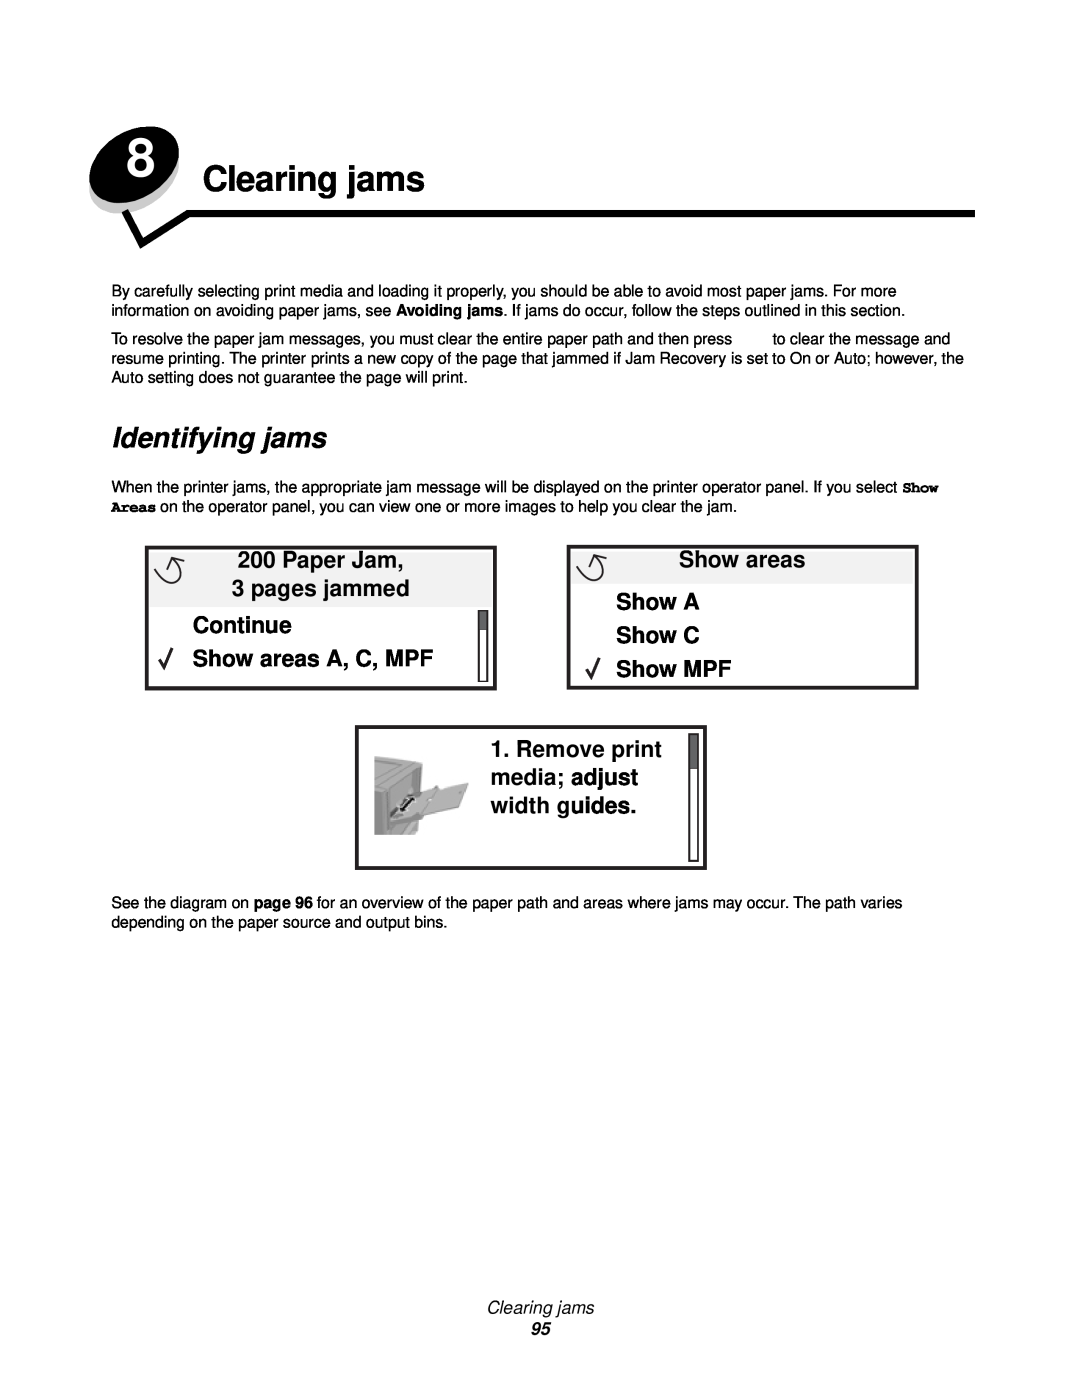 Lexmark 920 manual Clearing jams, Identifying jams, Paper Jam, Show areas, pages jammed, Show A, Continue, Show C, Show MPF 